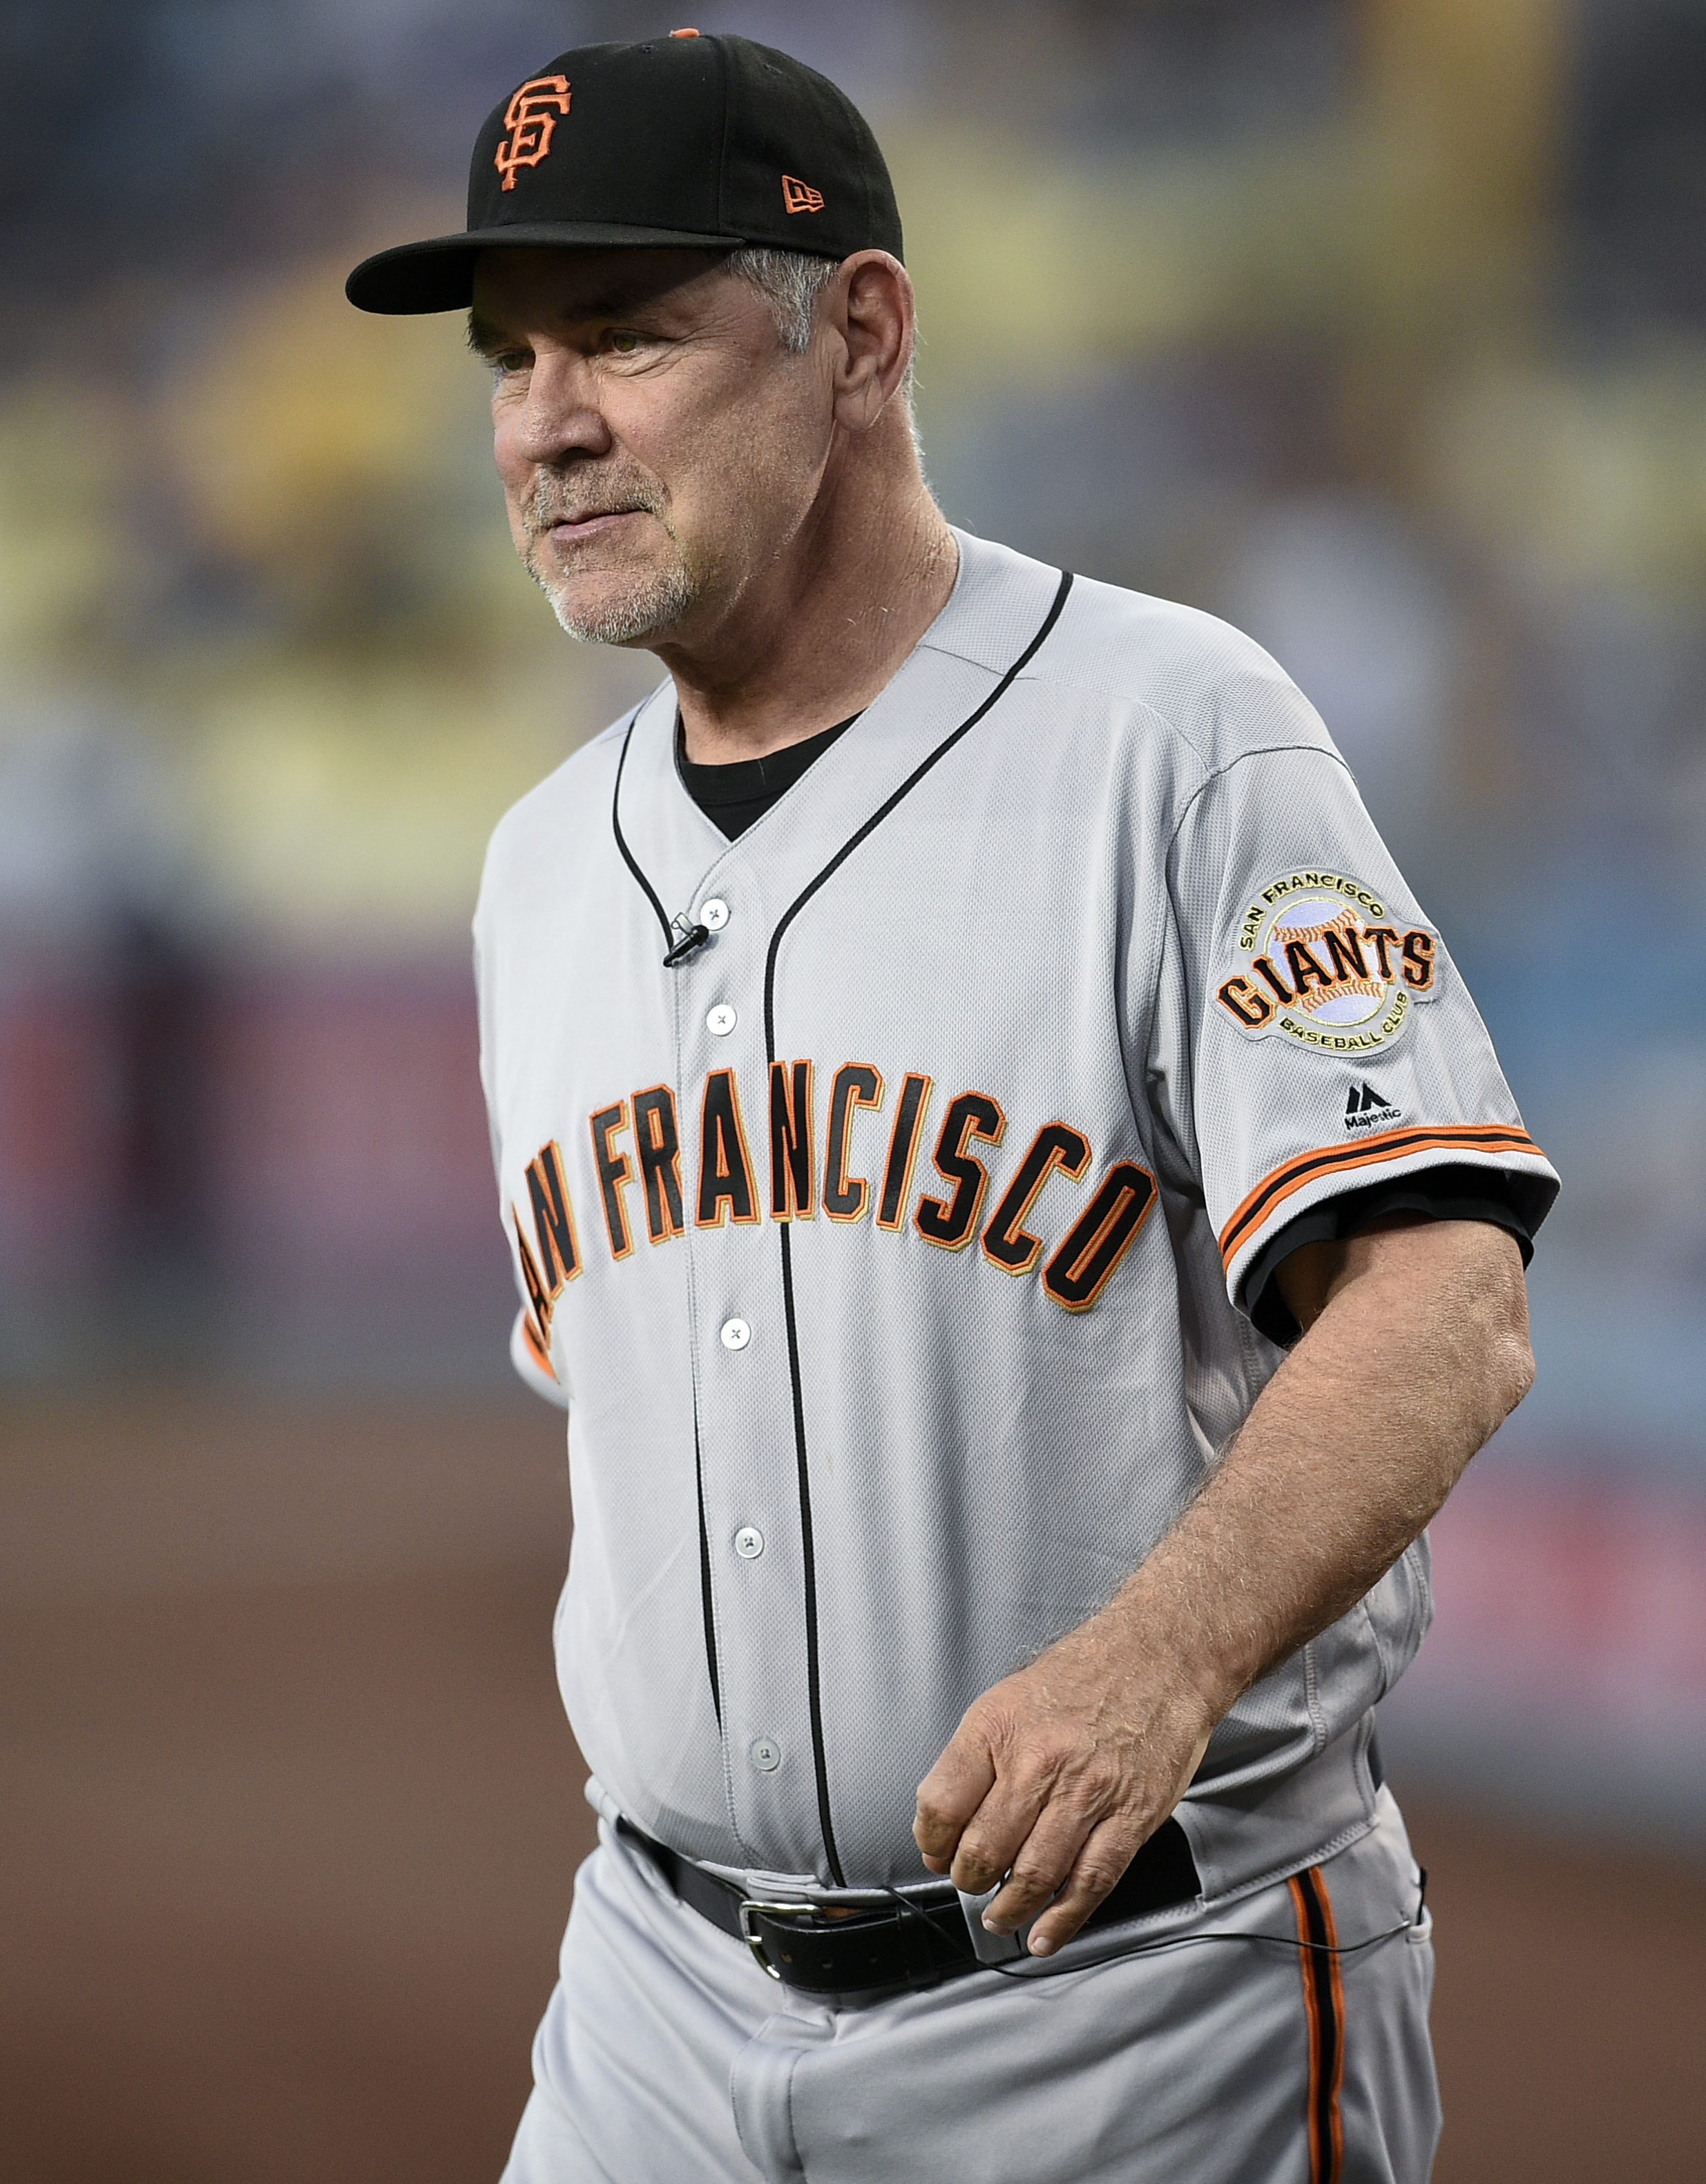 VIDEO: Melbourne's Bruce Bochy; 3-Time MLB World Series Champion